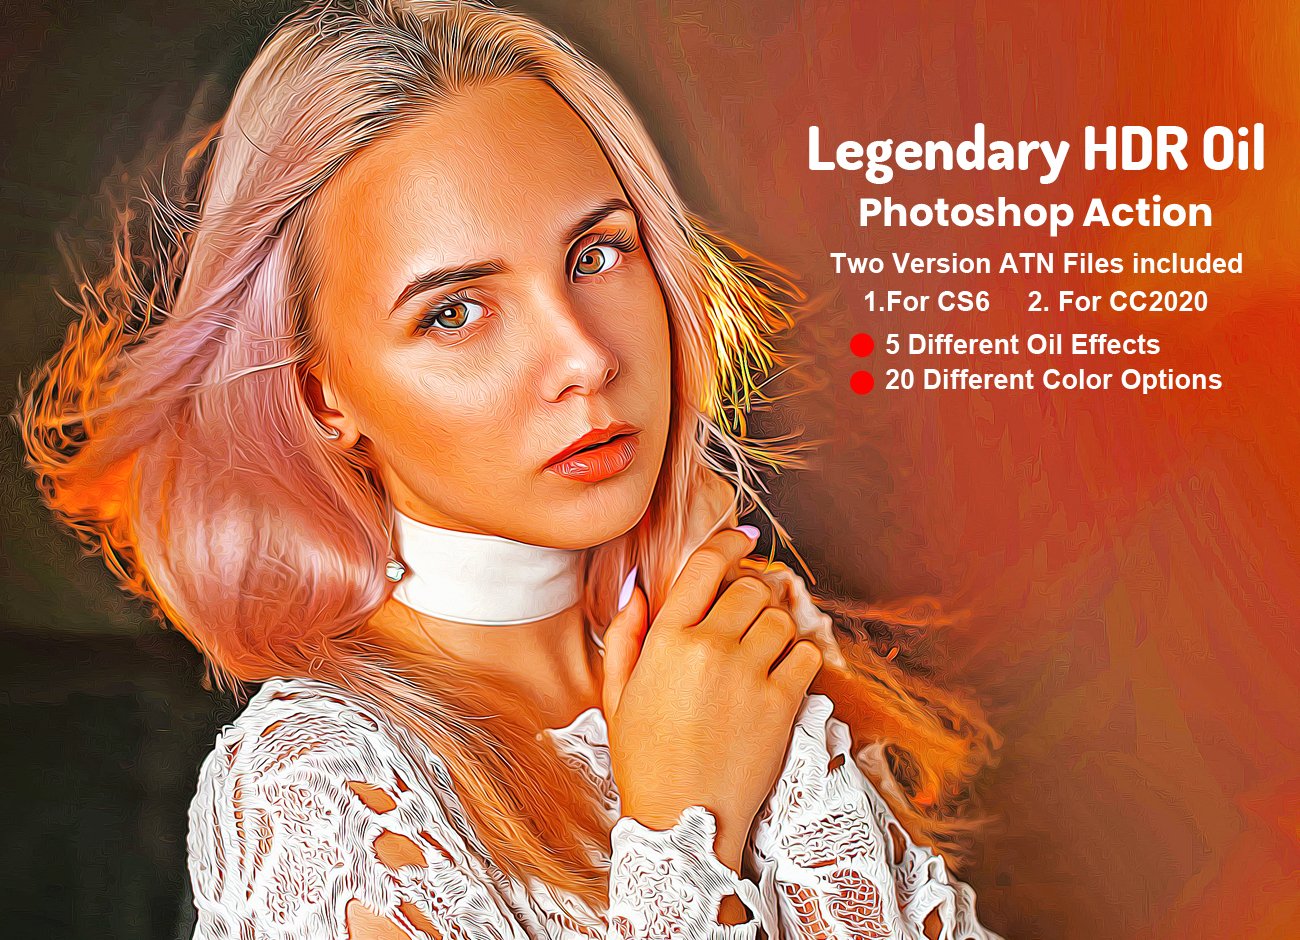 Legendary HDR Oil Photoshop Actioncover image.